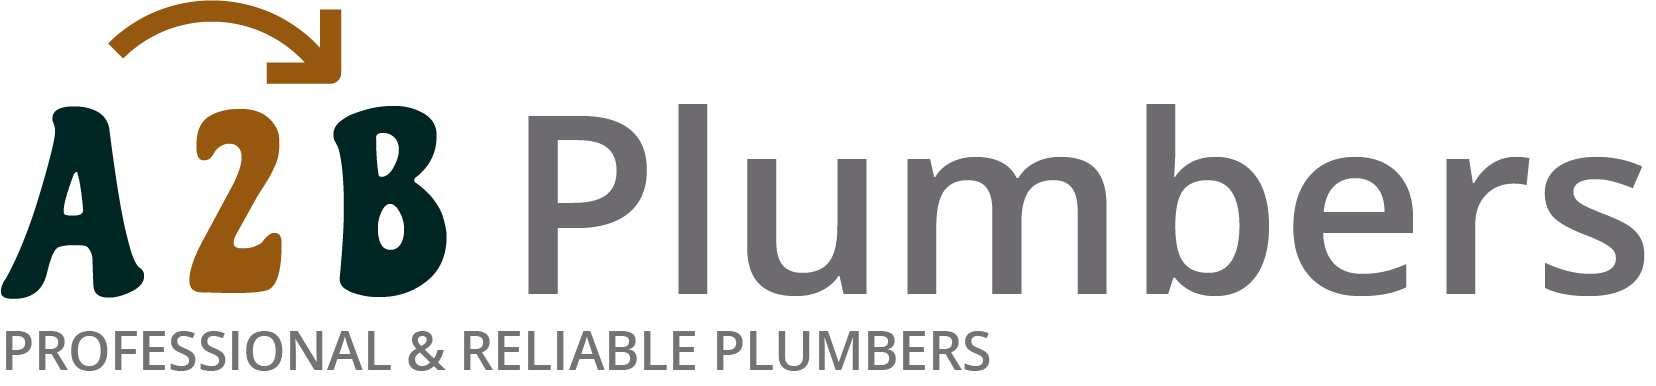 If you need a boiler installed, a radiator repaired or a leaking tap fixed, call us now - we provide services for properties in Ponders End and the local area.